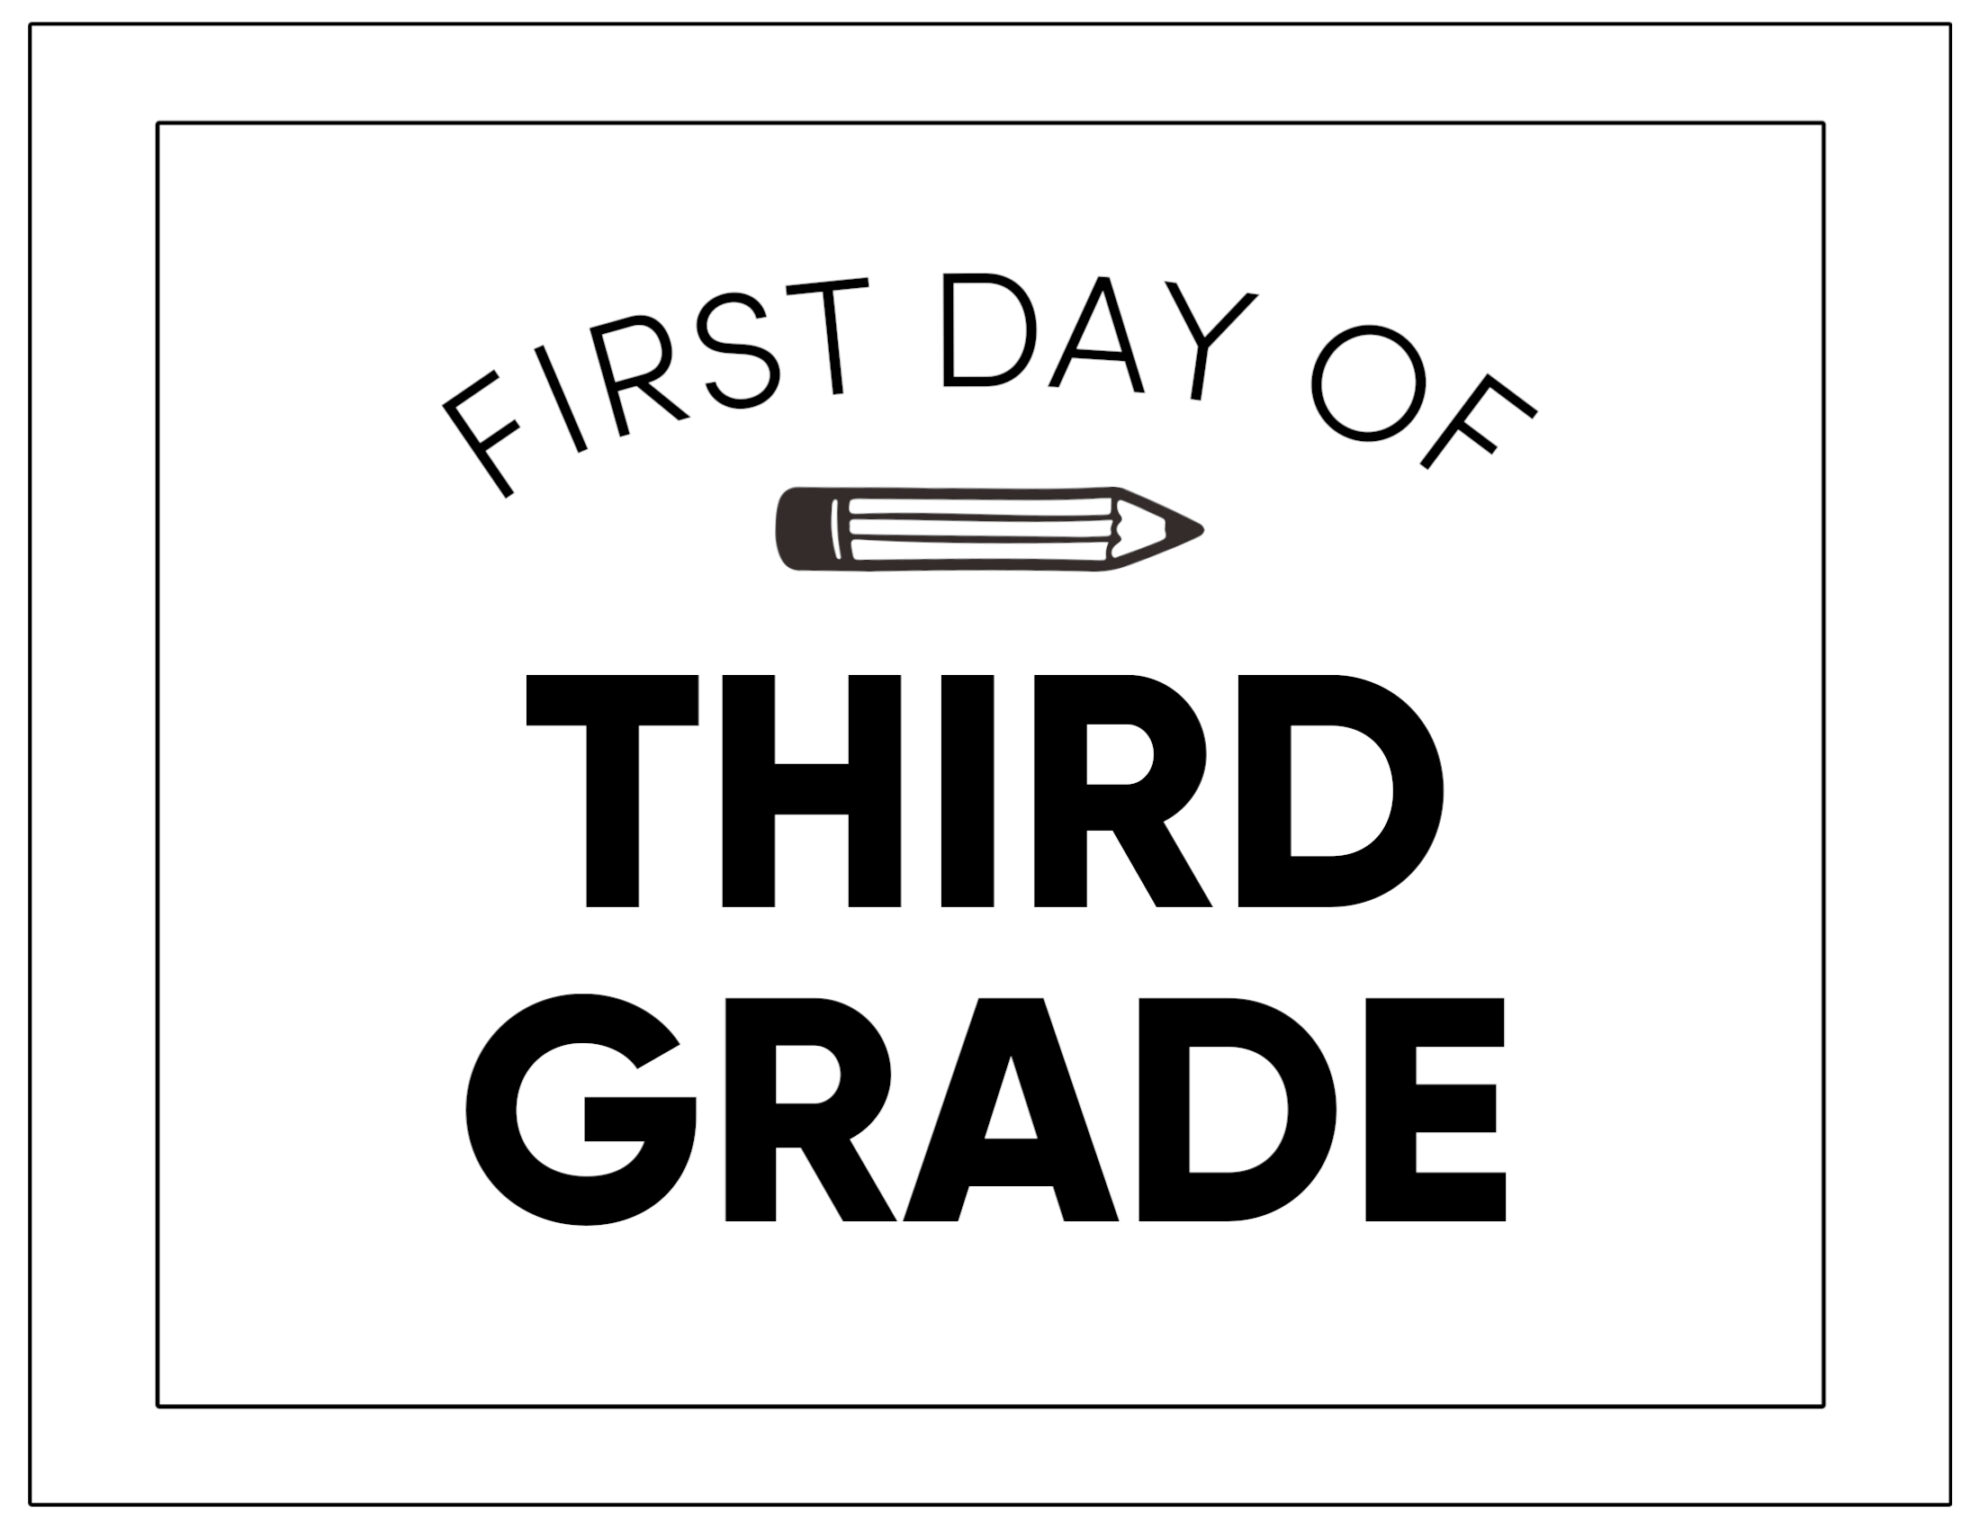 first-day-of-school-printable-signs